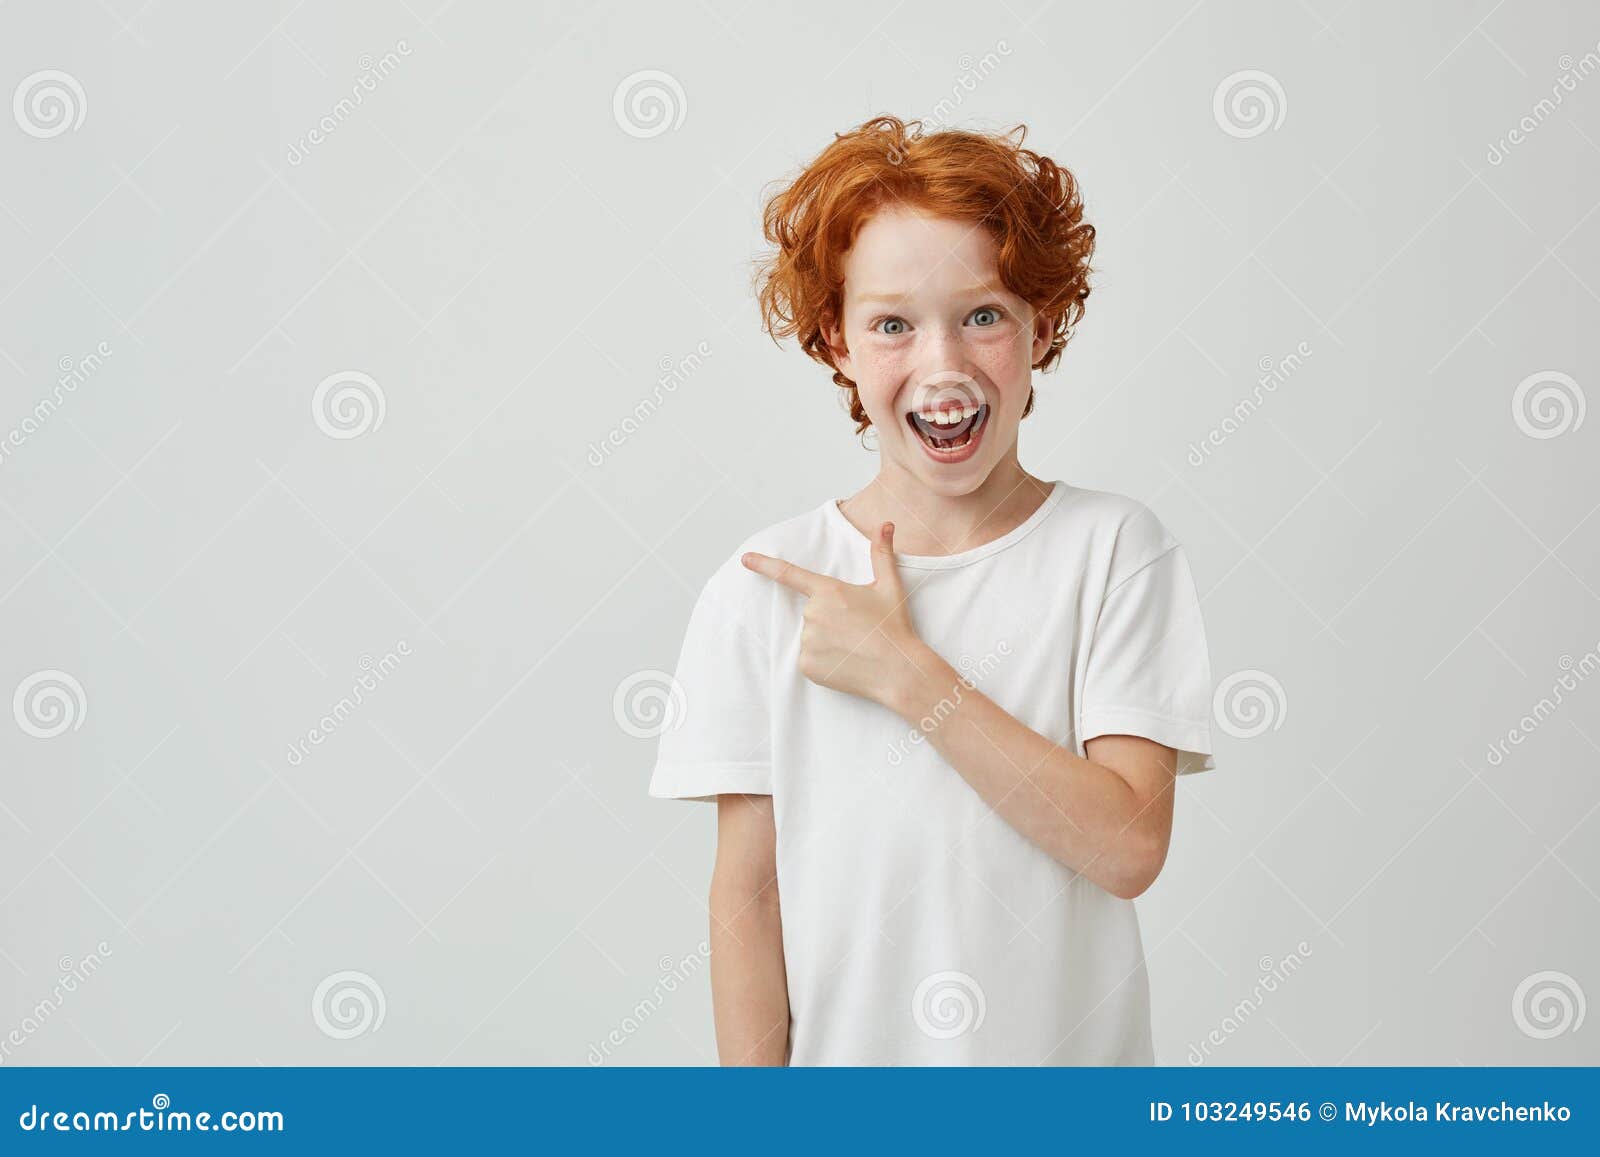 cheerful cute little boy with curly ginger hair and freckles happy smiling and pointing aside with finger on white